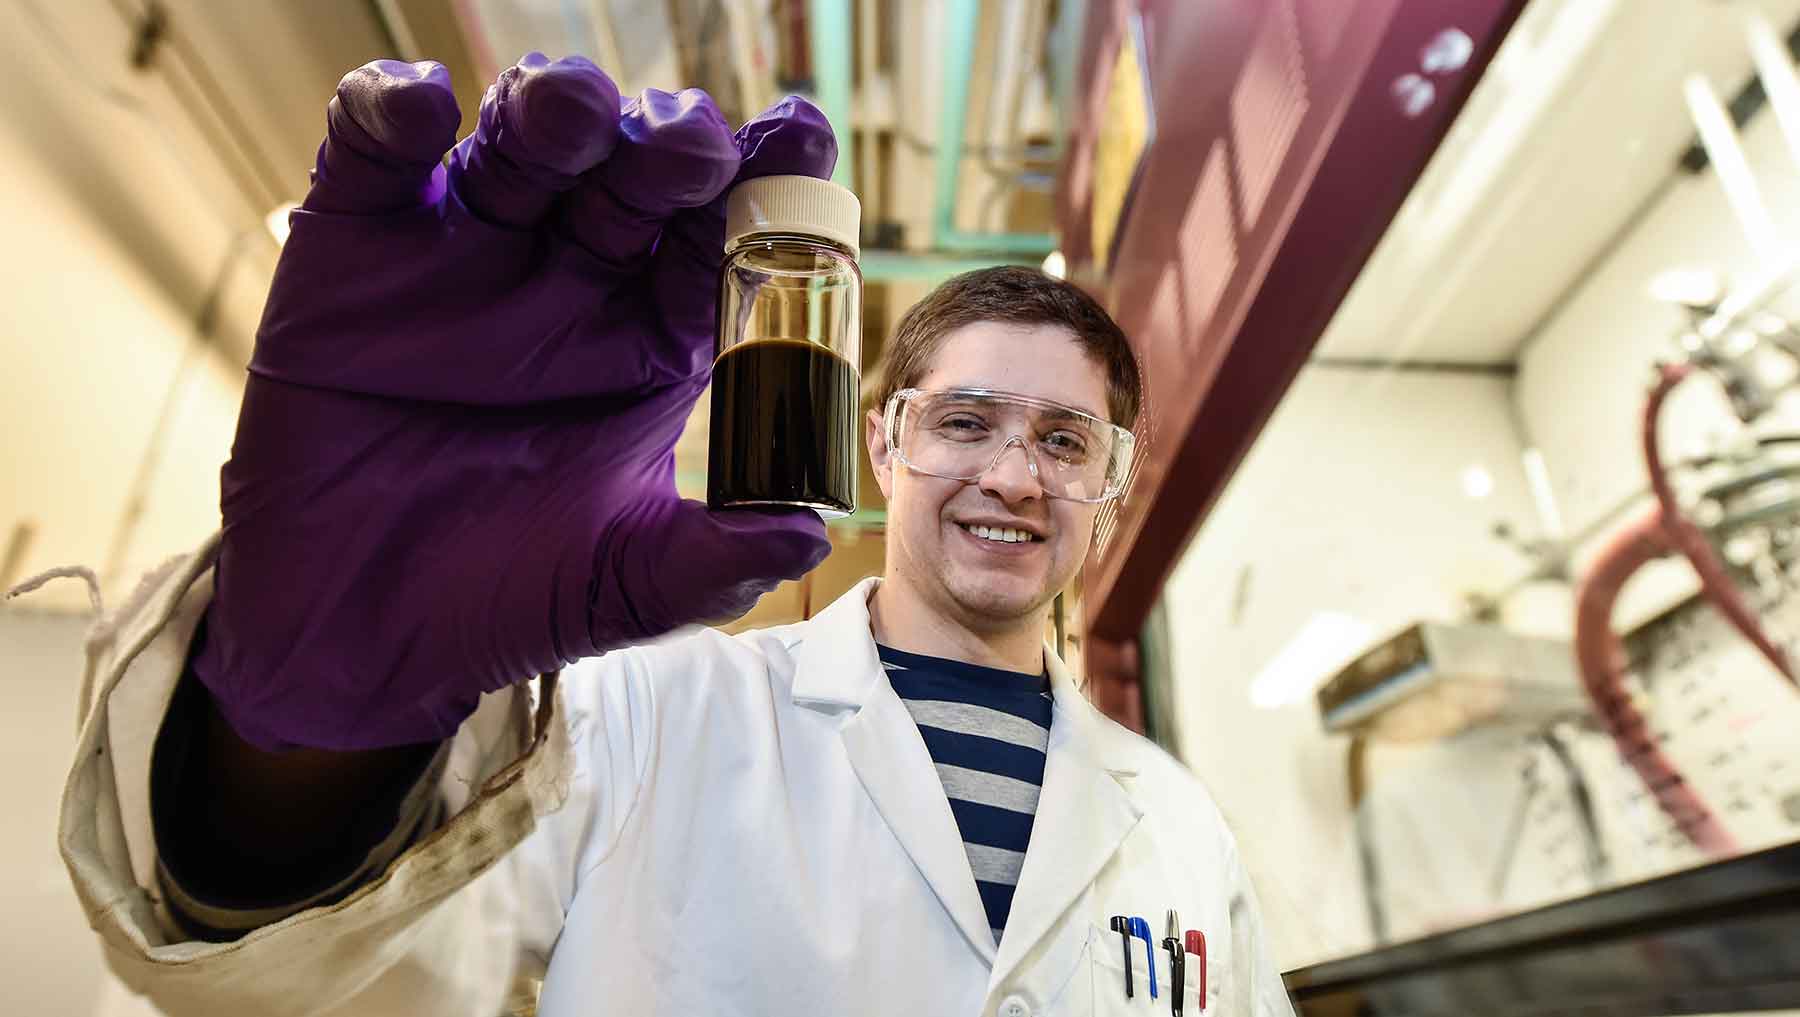 A man in a laboratory displays a solution in a small enclosed glass tube.